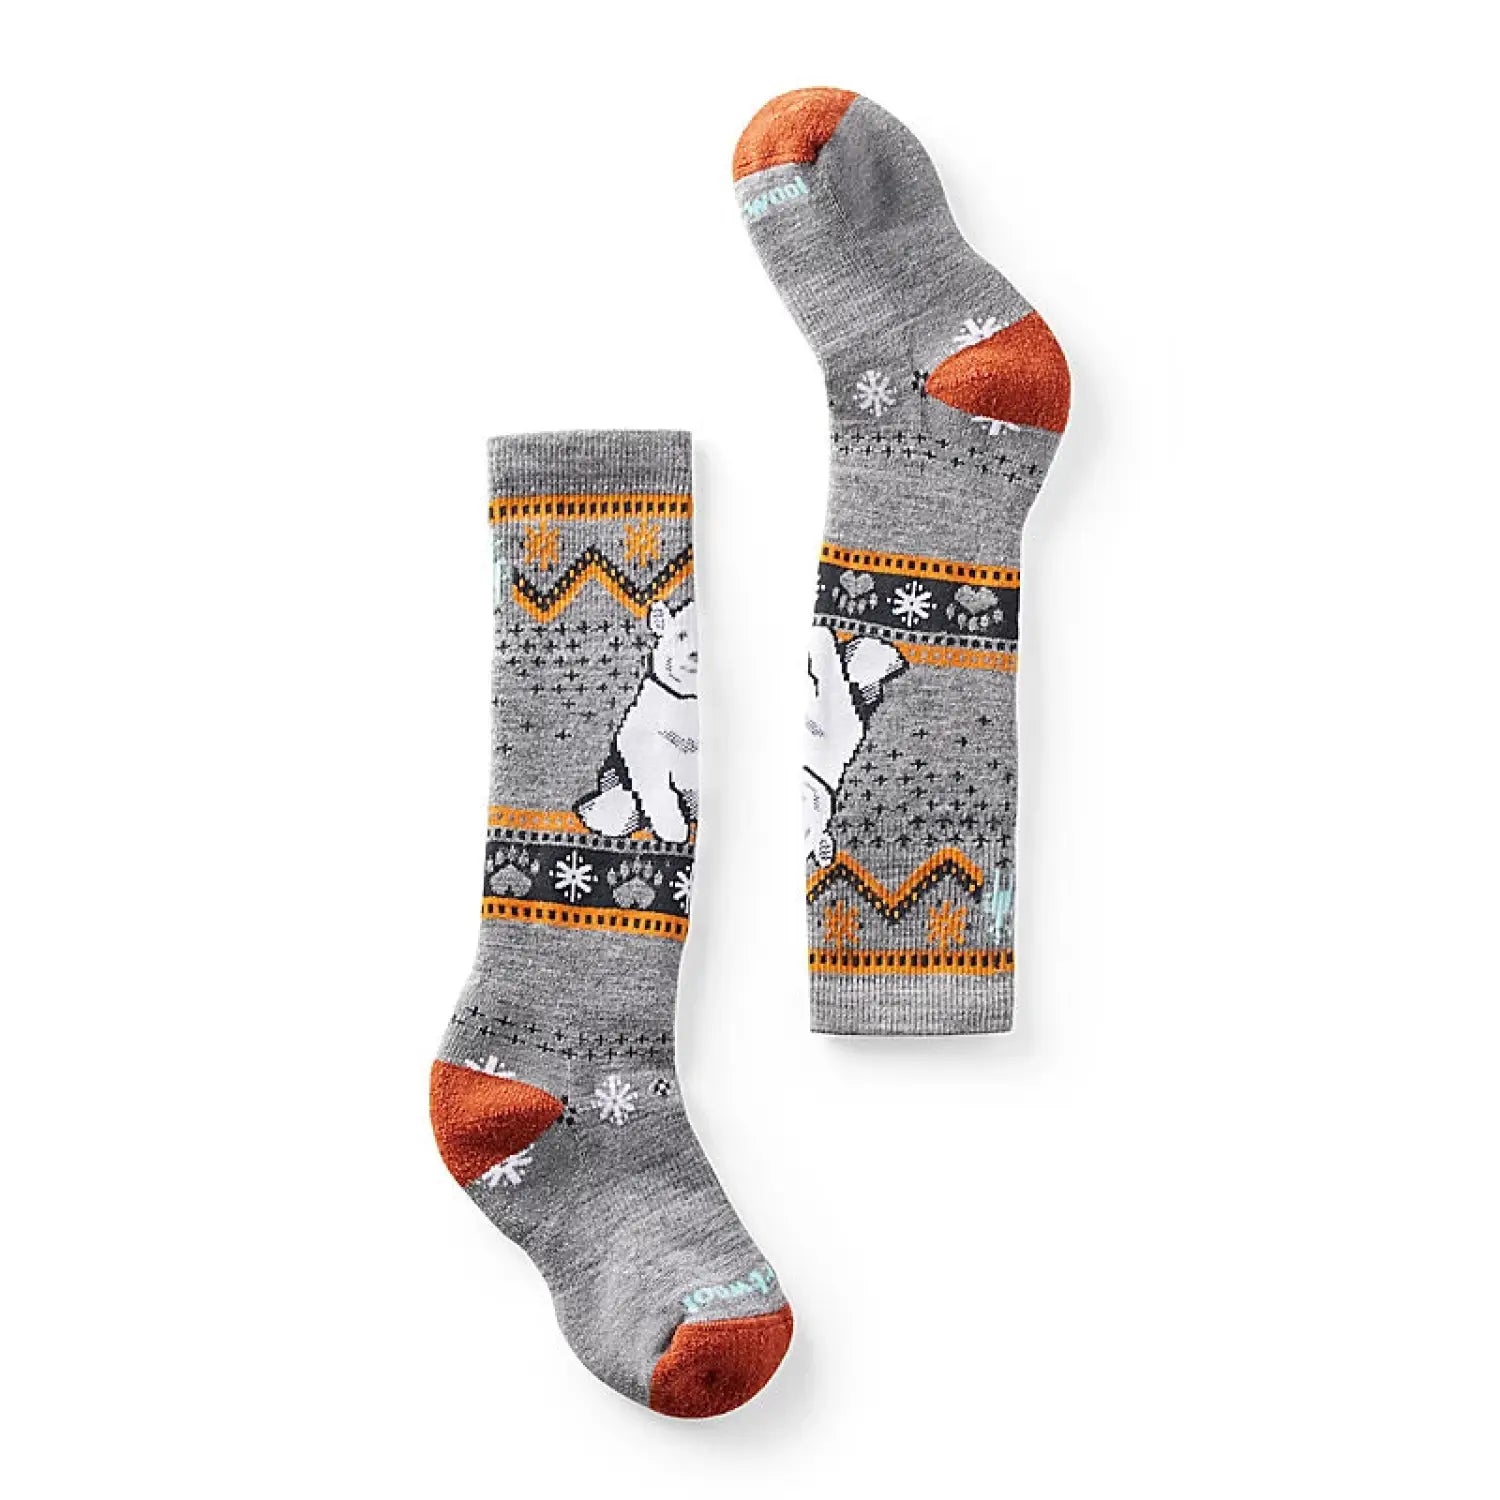 Smartwool Wintersport over the calf kid socks. Grey socks with white polar bears and orange and white accents. 